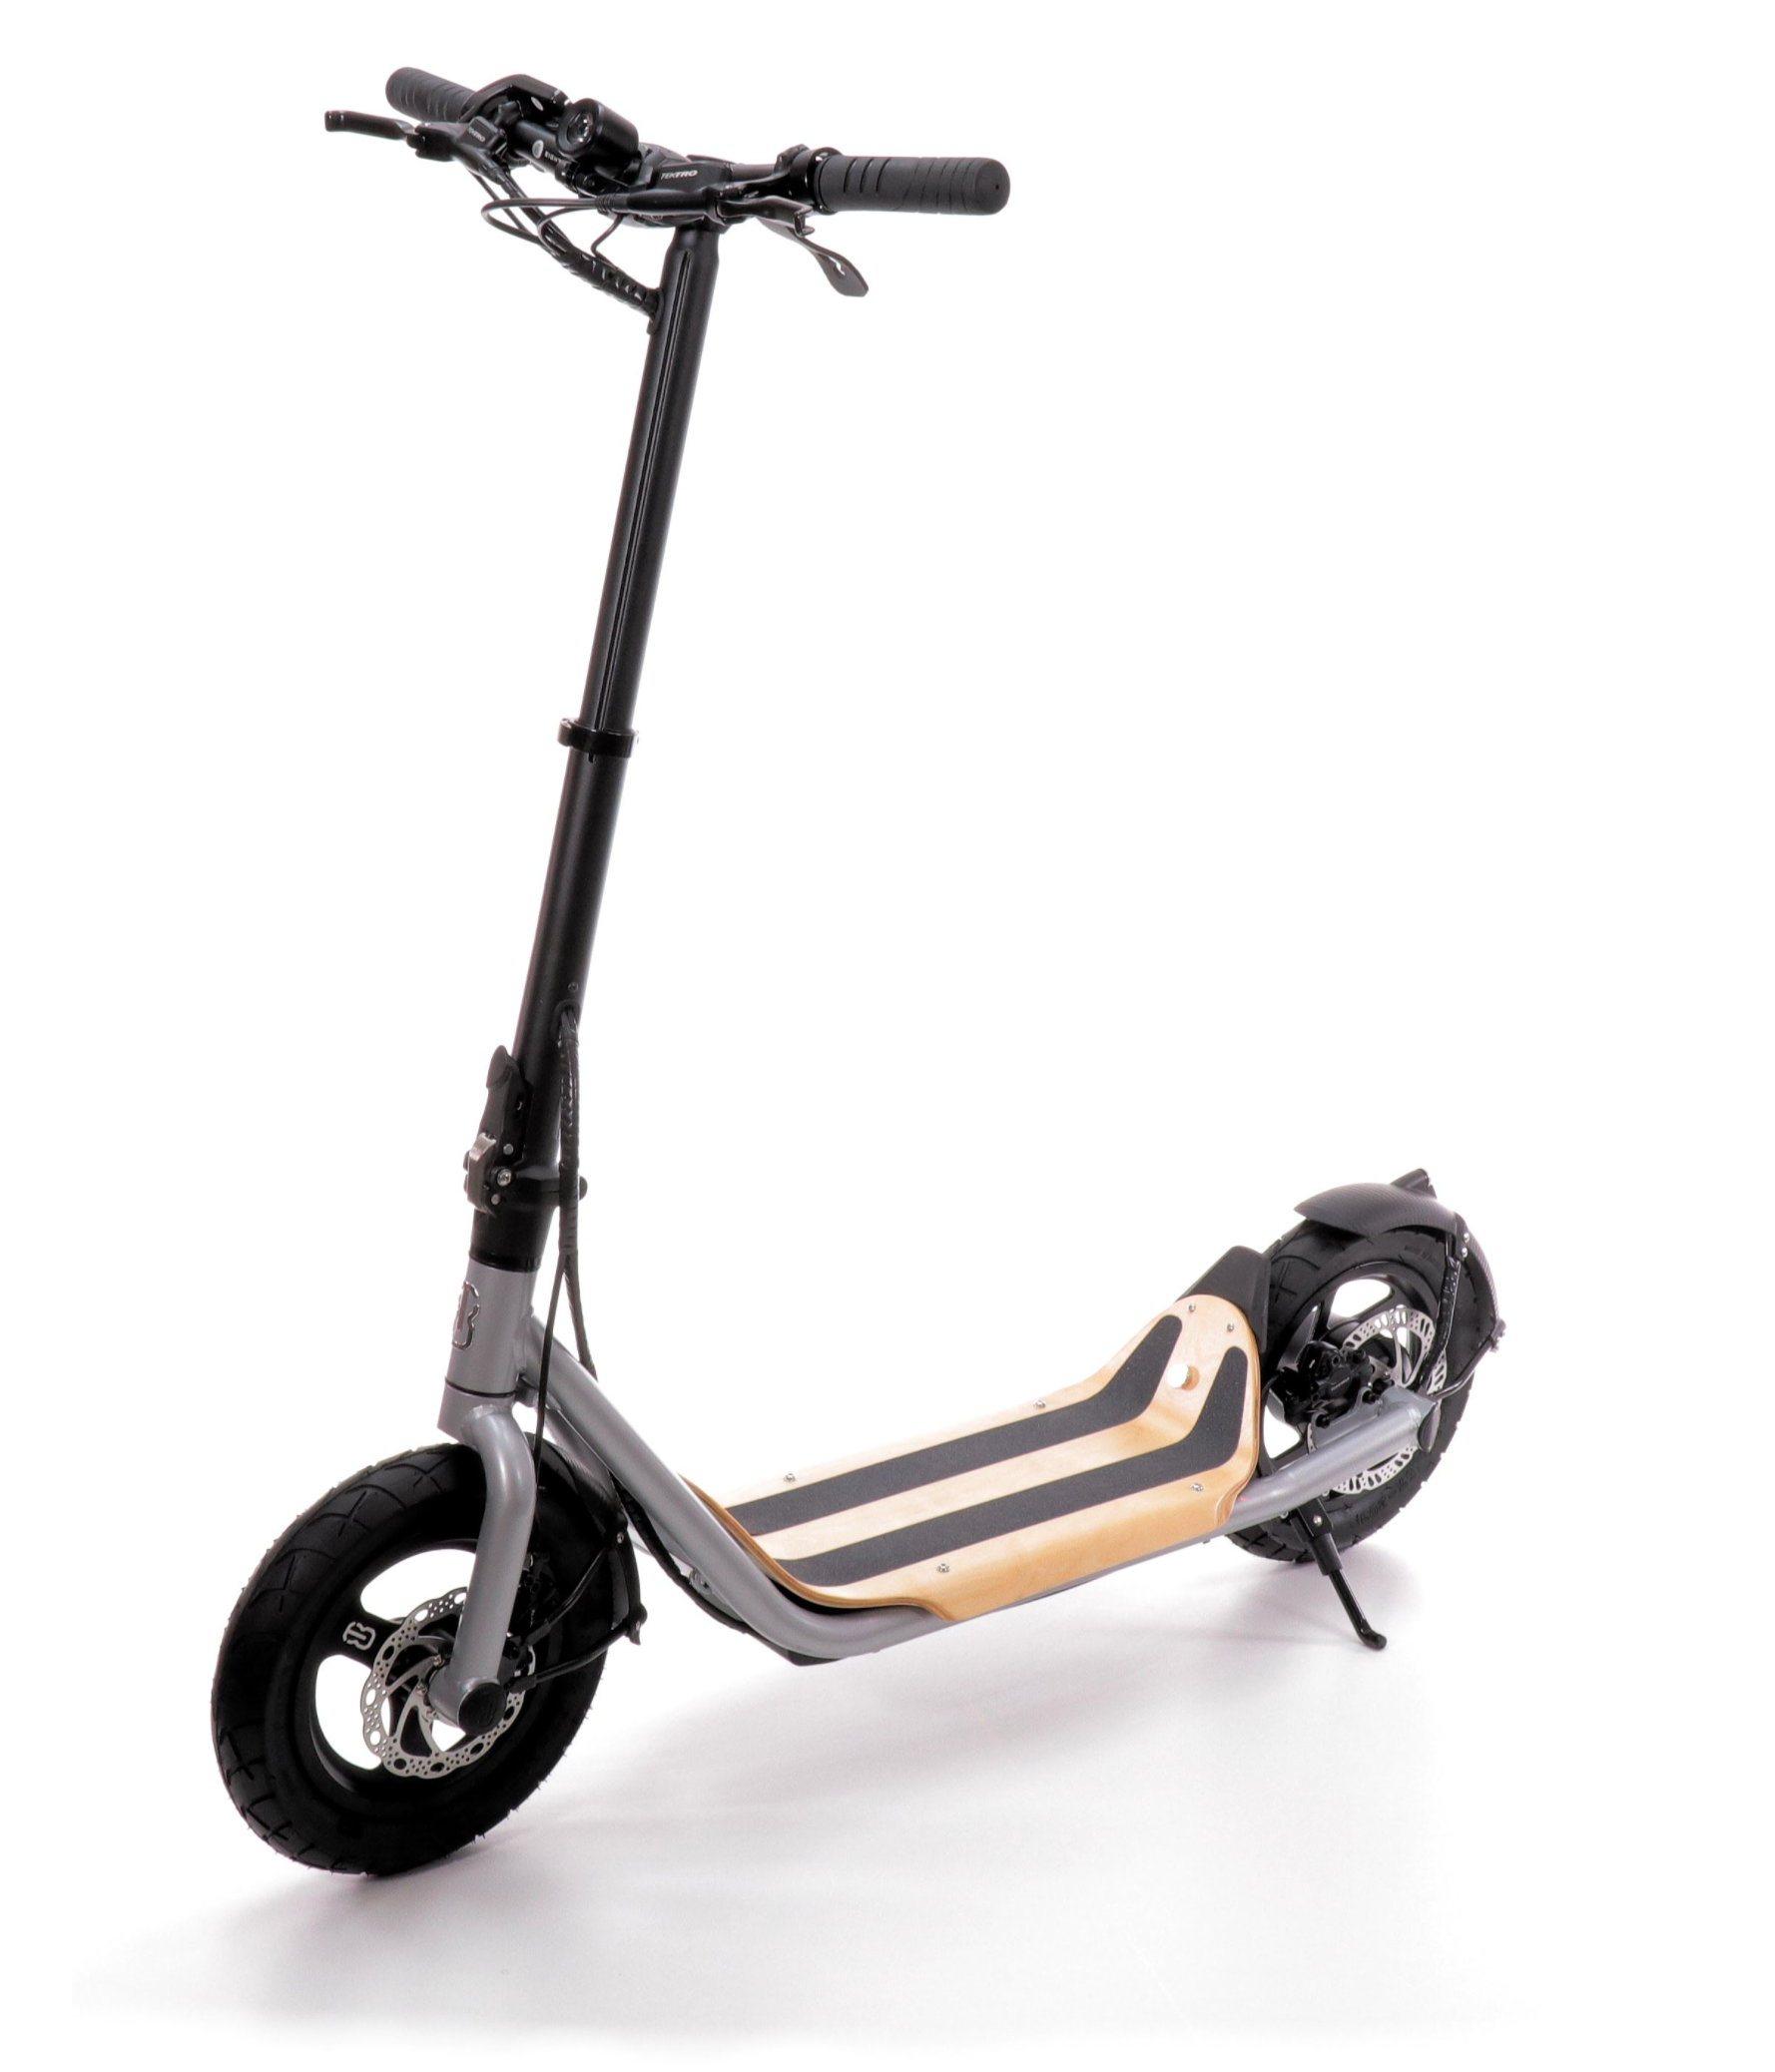 8Tev B12- Classic Electric Scooter